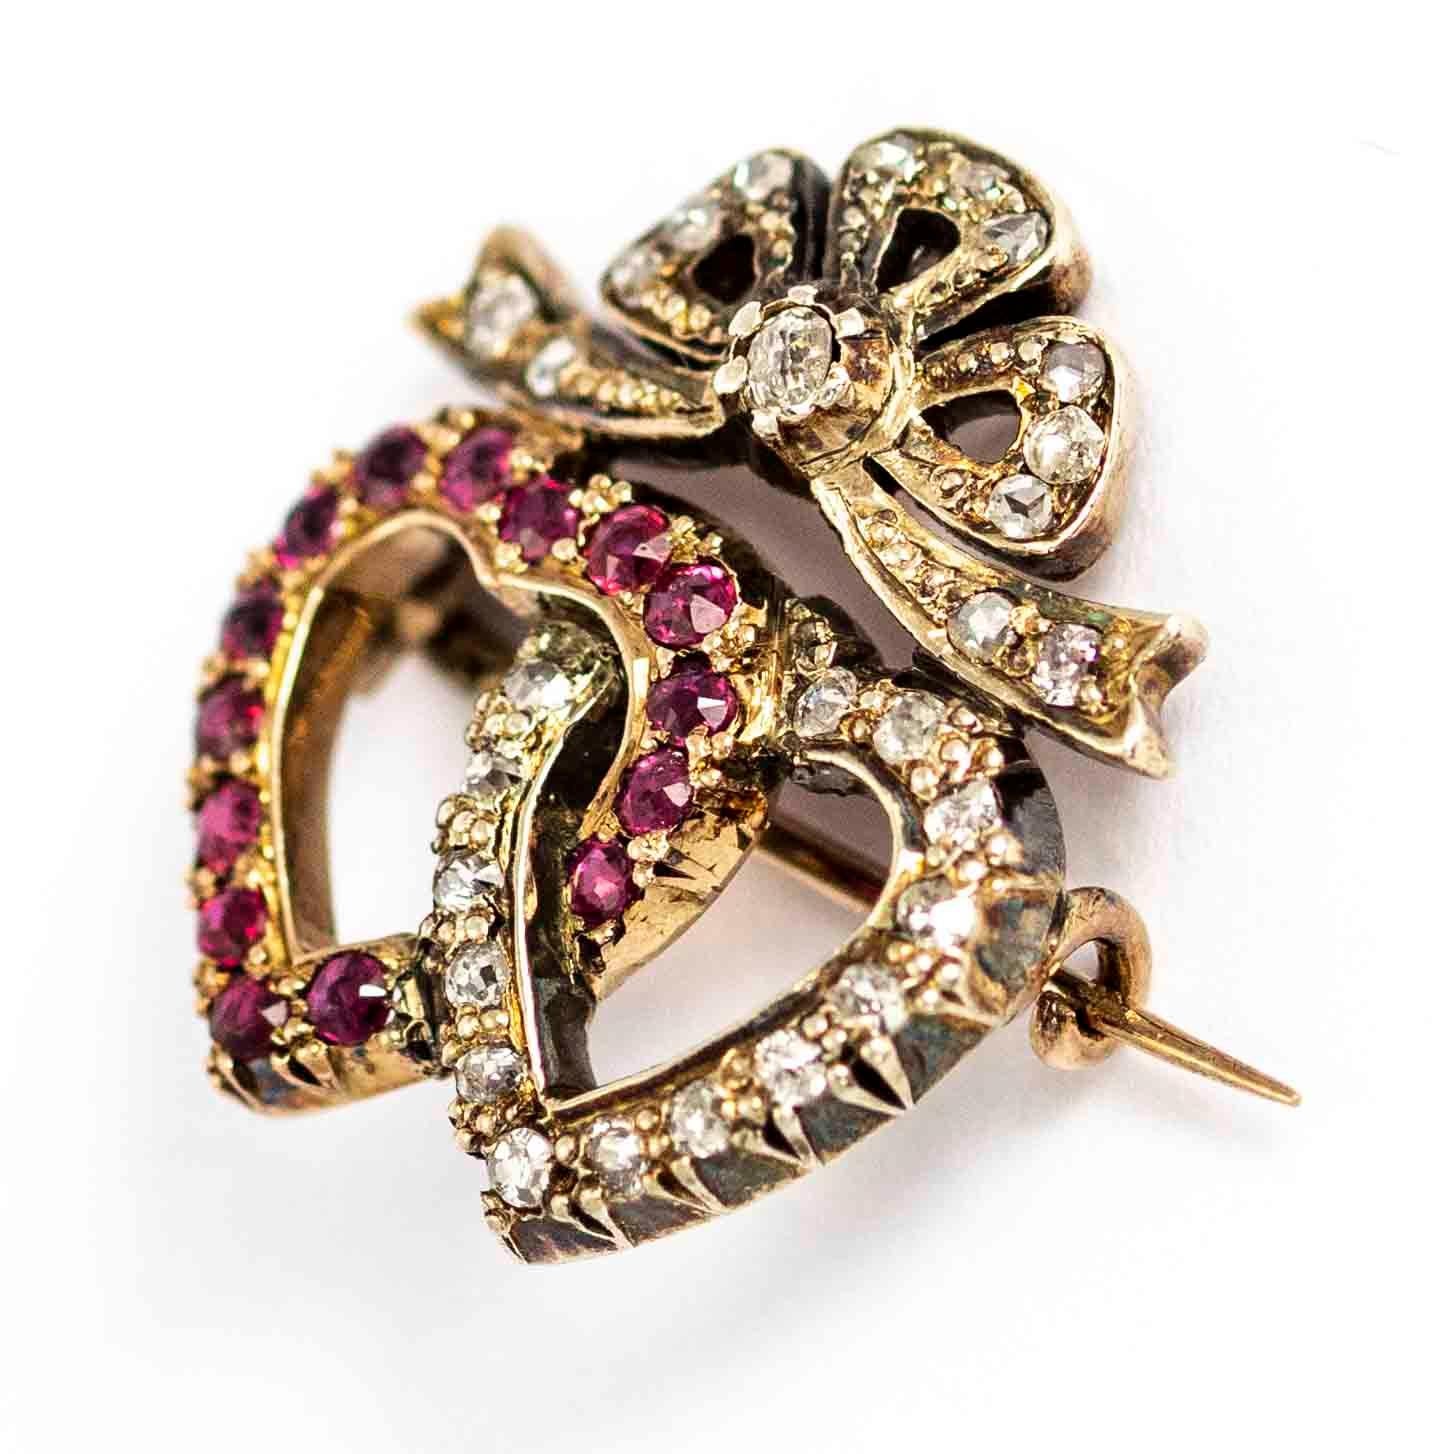 A superb vintage brooch featuring a pair of linked hearts below a bow motif. One of the hearts is set with wonderful pink topaz, the other is set with white diamonds. The bow if further set with diamonds, with the largest stone in the knot of the